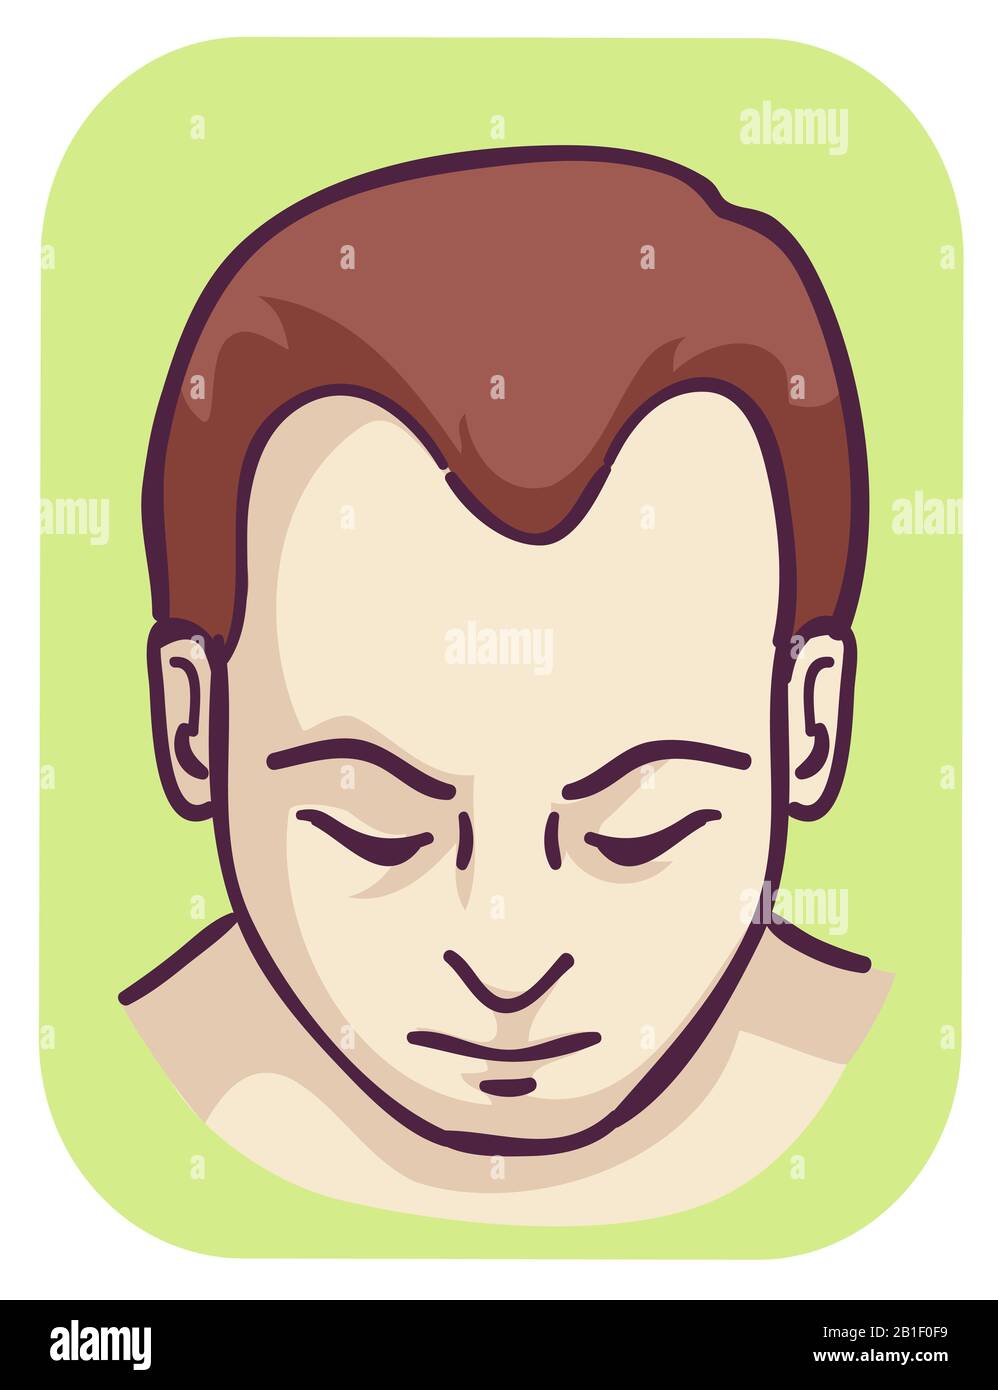 Illustration of a Man with M Pattern Baldness Hairline Loss Stock Photo